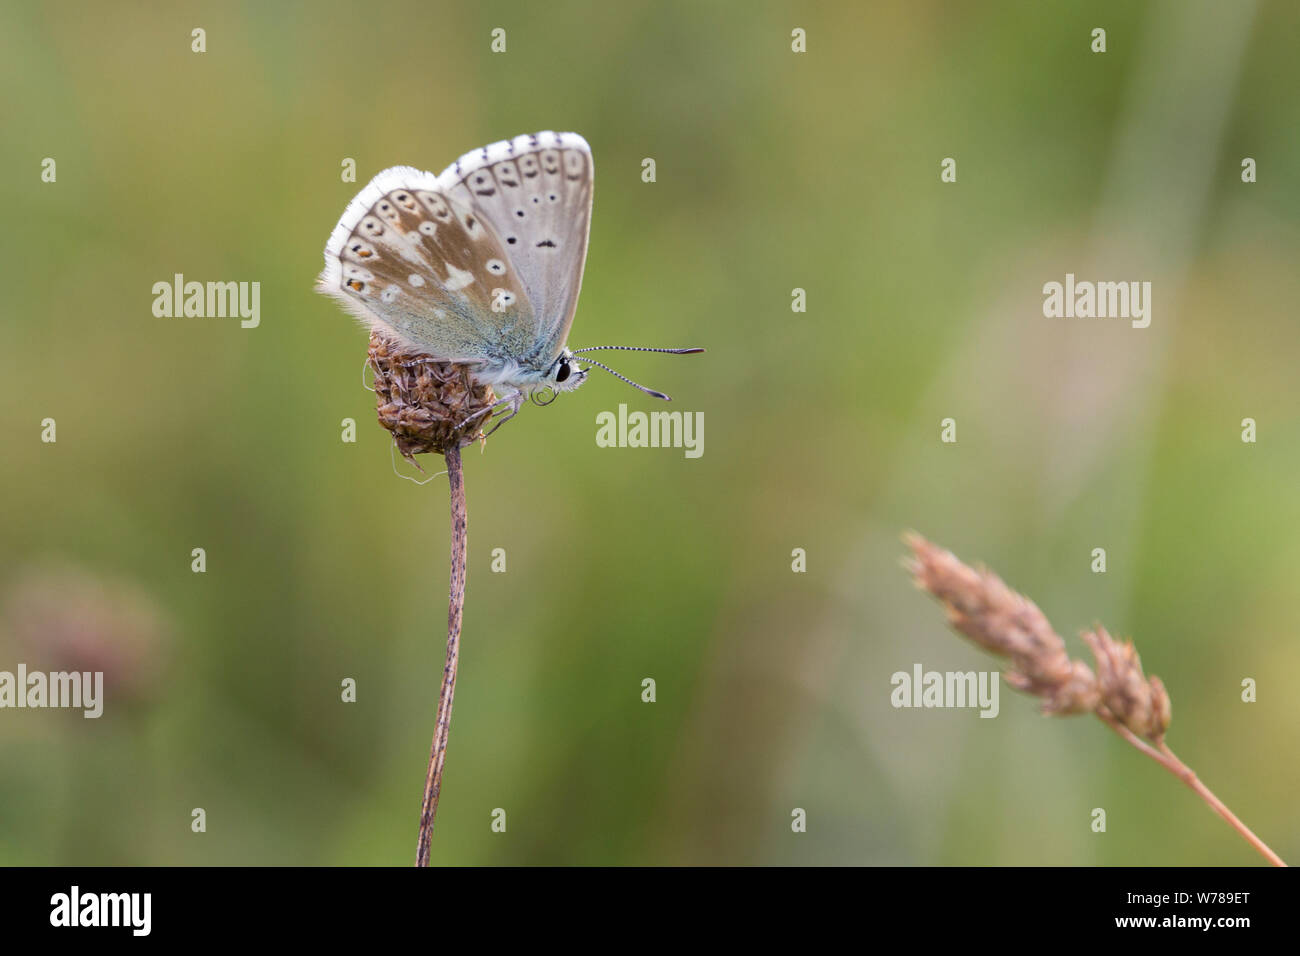 Common blue butterfly (Polyommatus icarus) upper wings blue (male) closed wings (underside) grey and brown with dark spots white feathery outer edges Stock Photo